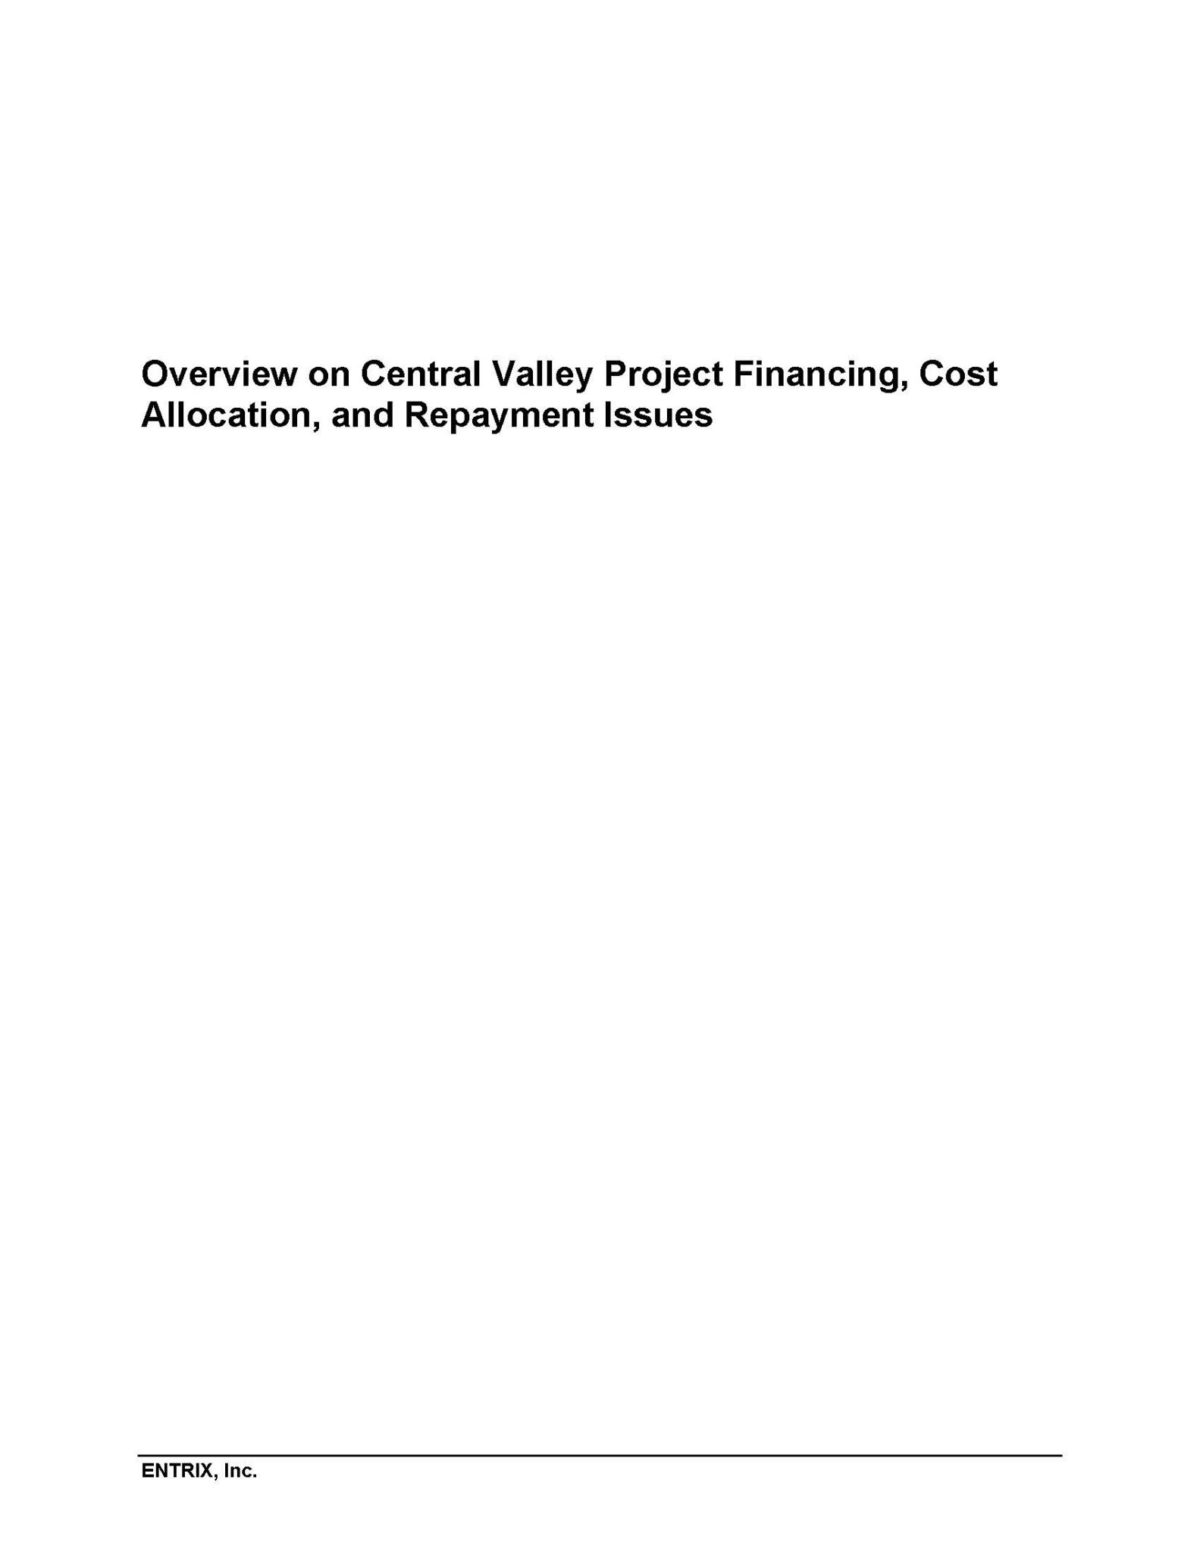 Overview on Central Valley Project Financing, Cost Allocation, and Repayment Issues